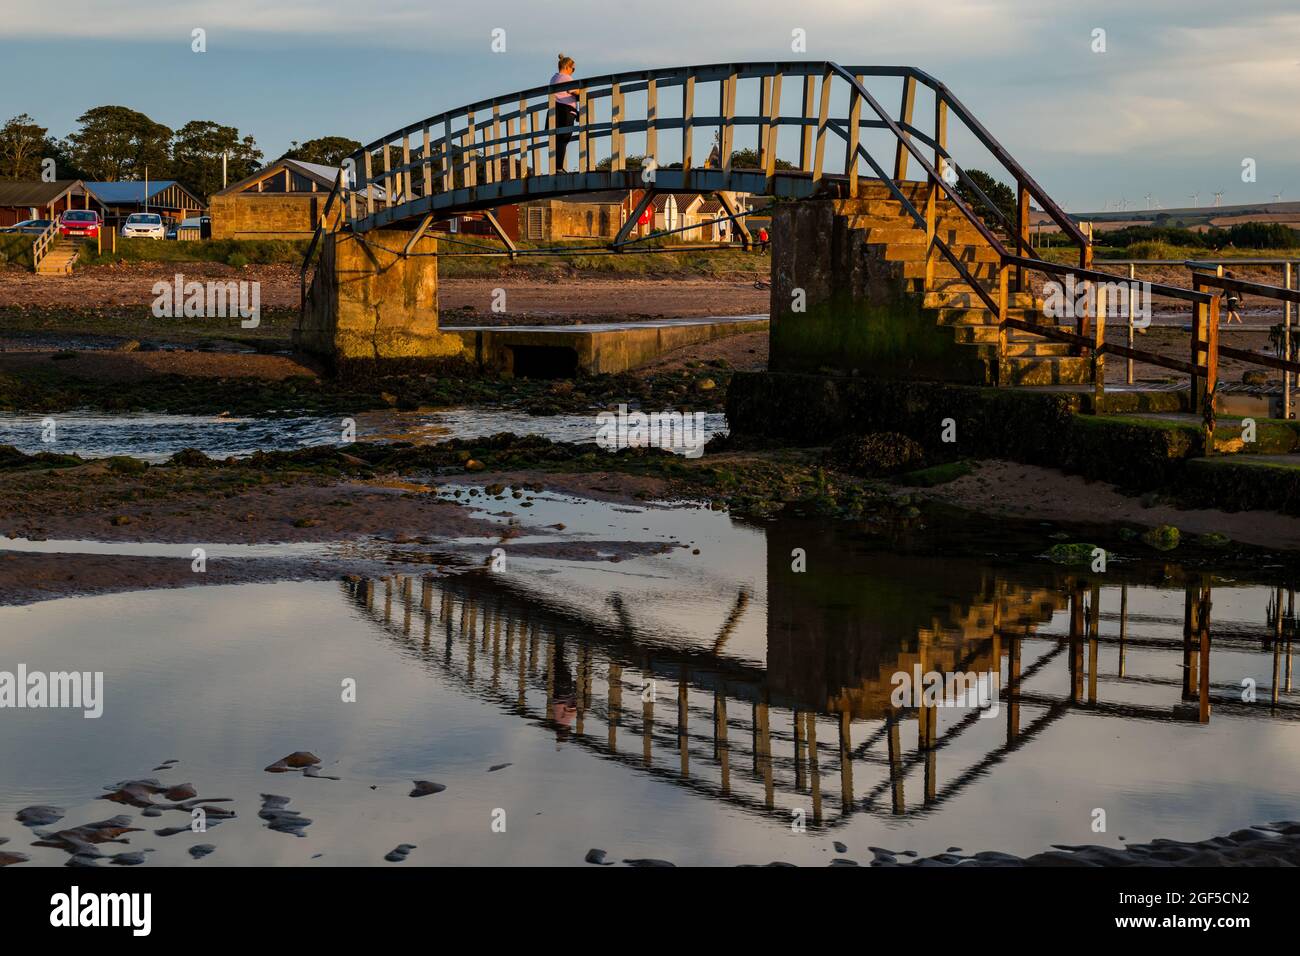 Dunbar, East Lothian, Scotland, United Kingdom, 23rd August 2021. UK Weather: sunset at Belhaven Bay. A warm evening with a colourful sky as the sun sets at low tide with a woman standing on the so-called 'Bridge to Nowhere' Stock Photo